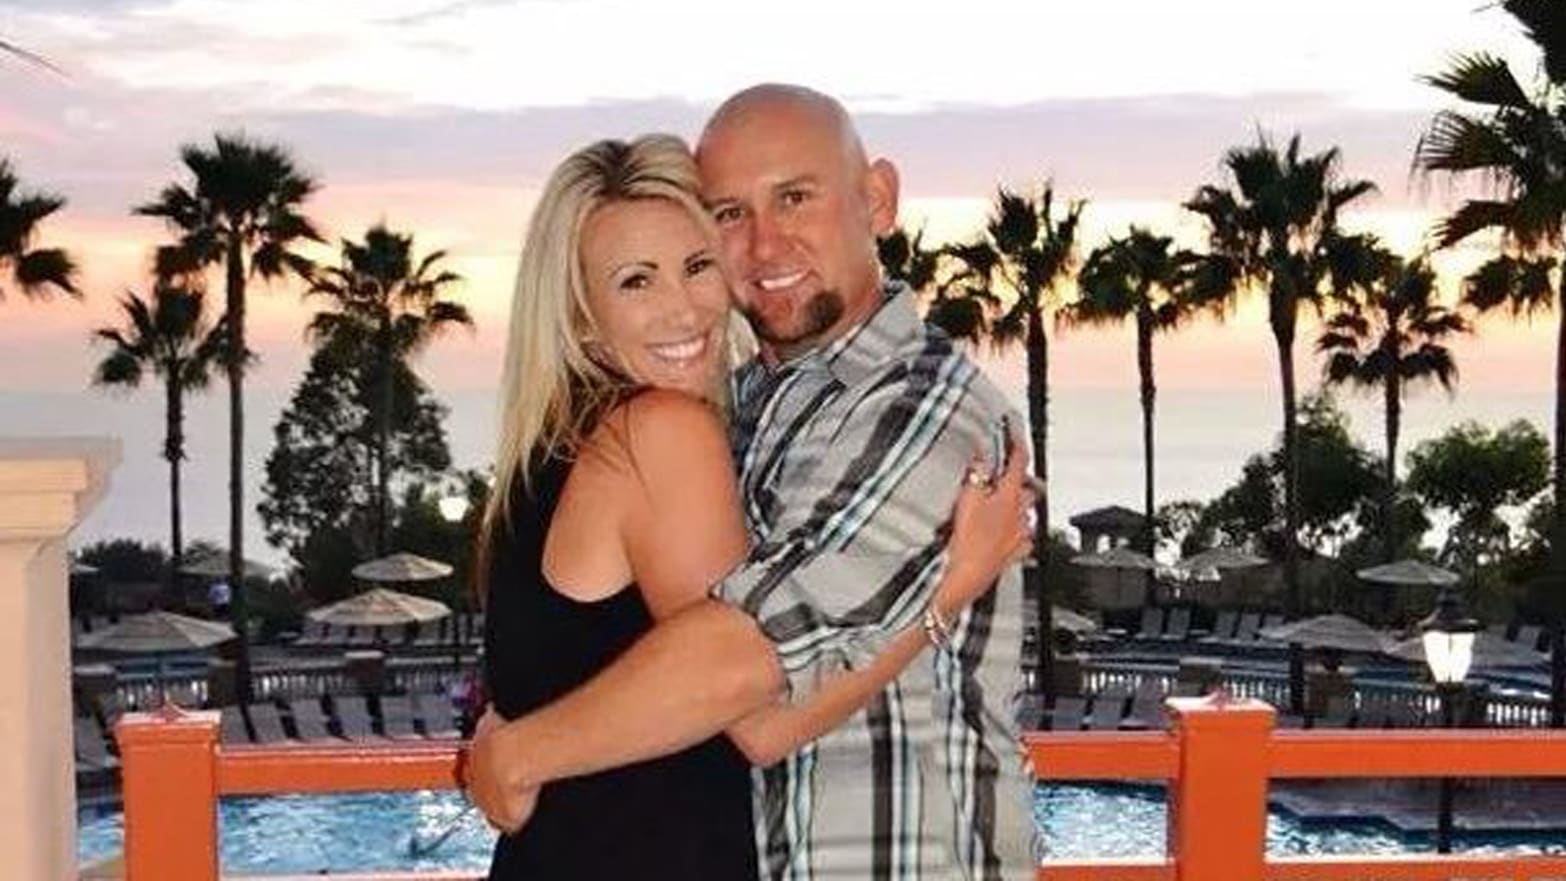 California Mom Sabrina Limon Found Guilty in Brutal Murder of Swinger Hubby